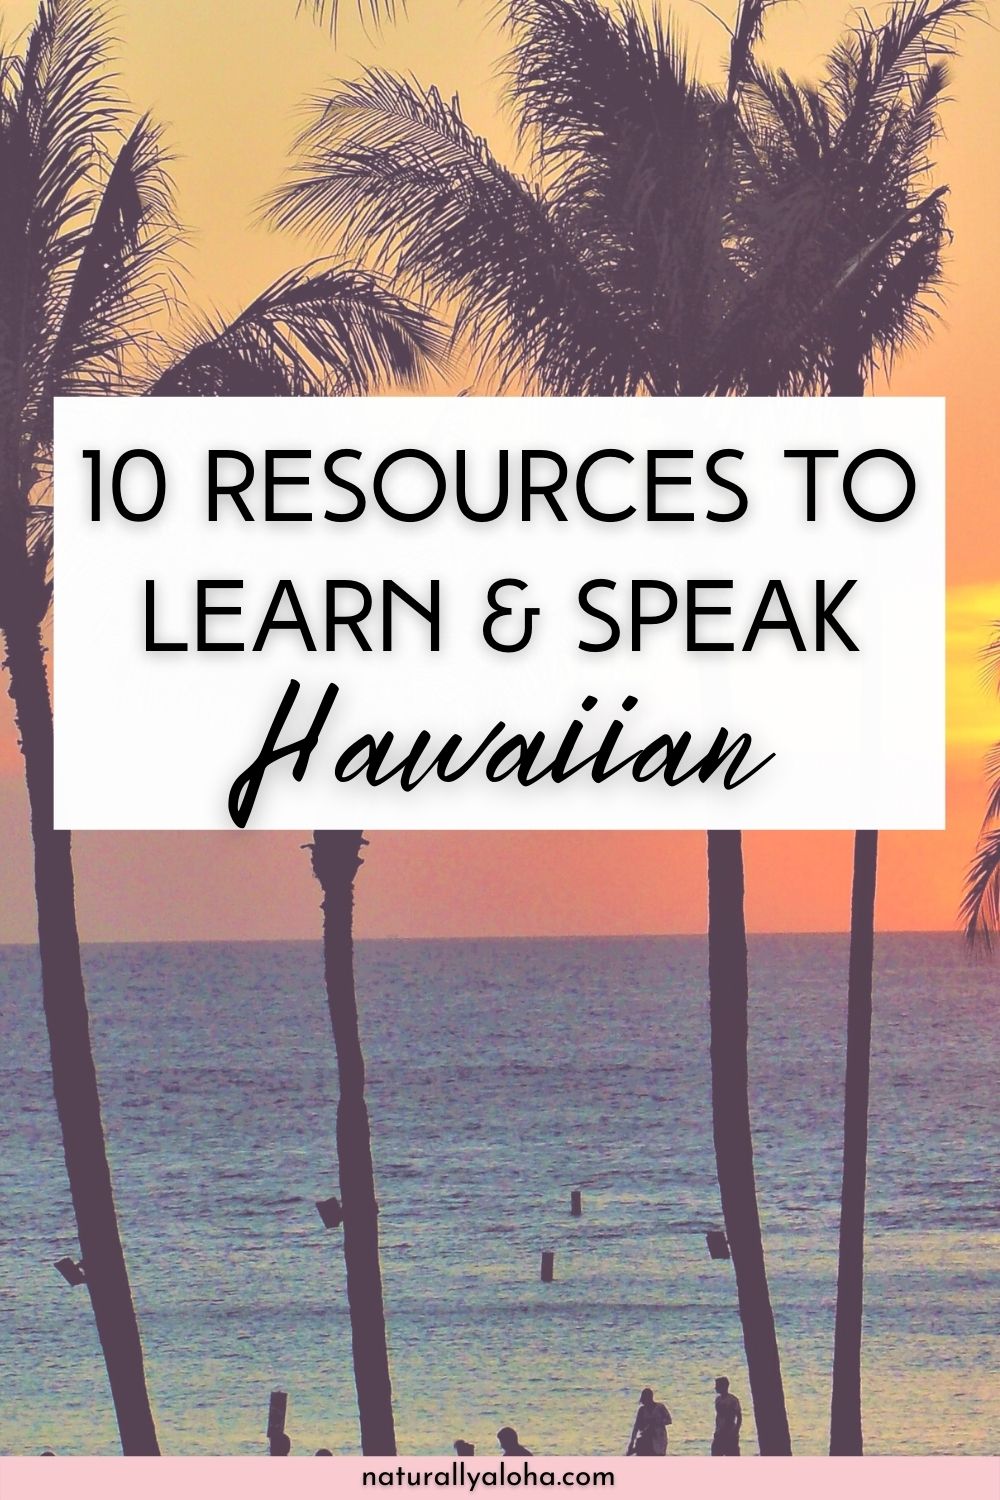 10 Quick Resources to Learn the Hawaiian Language